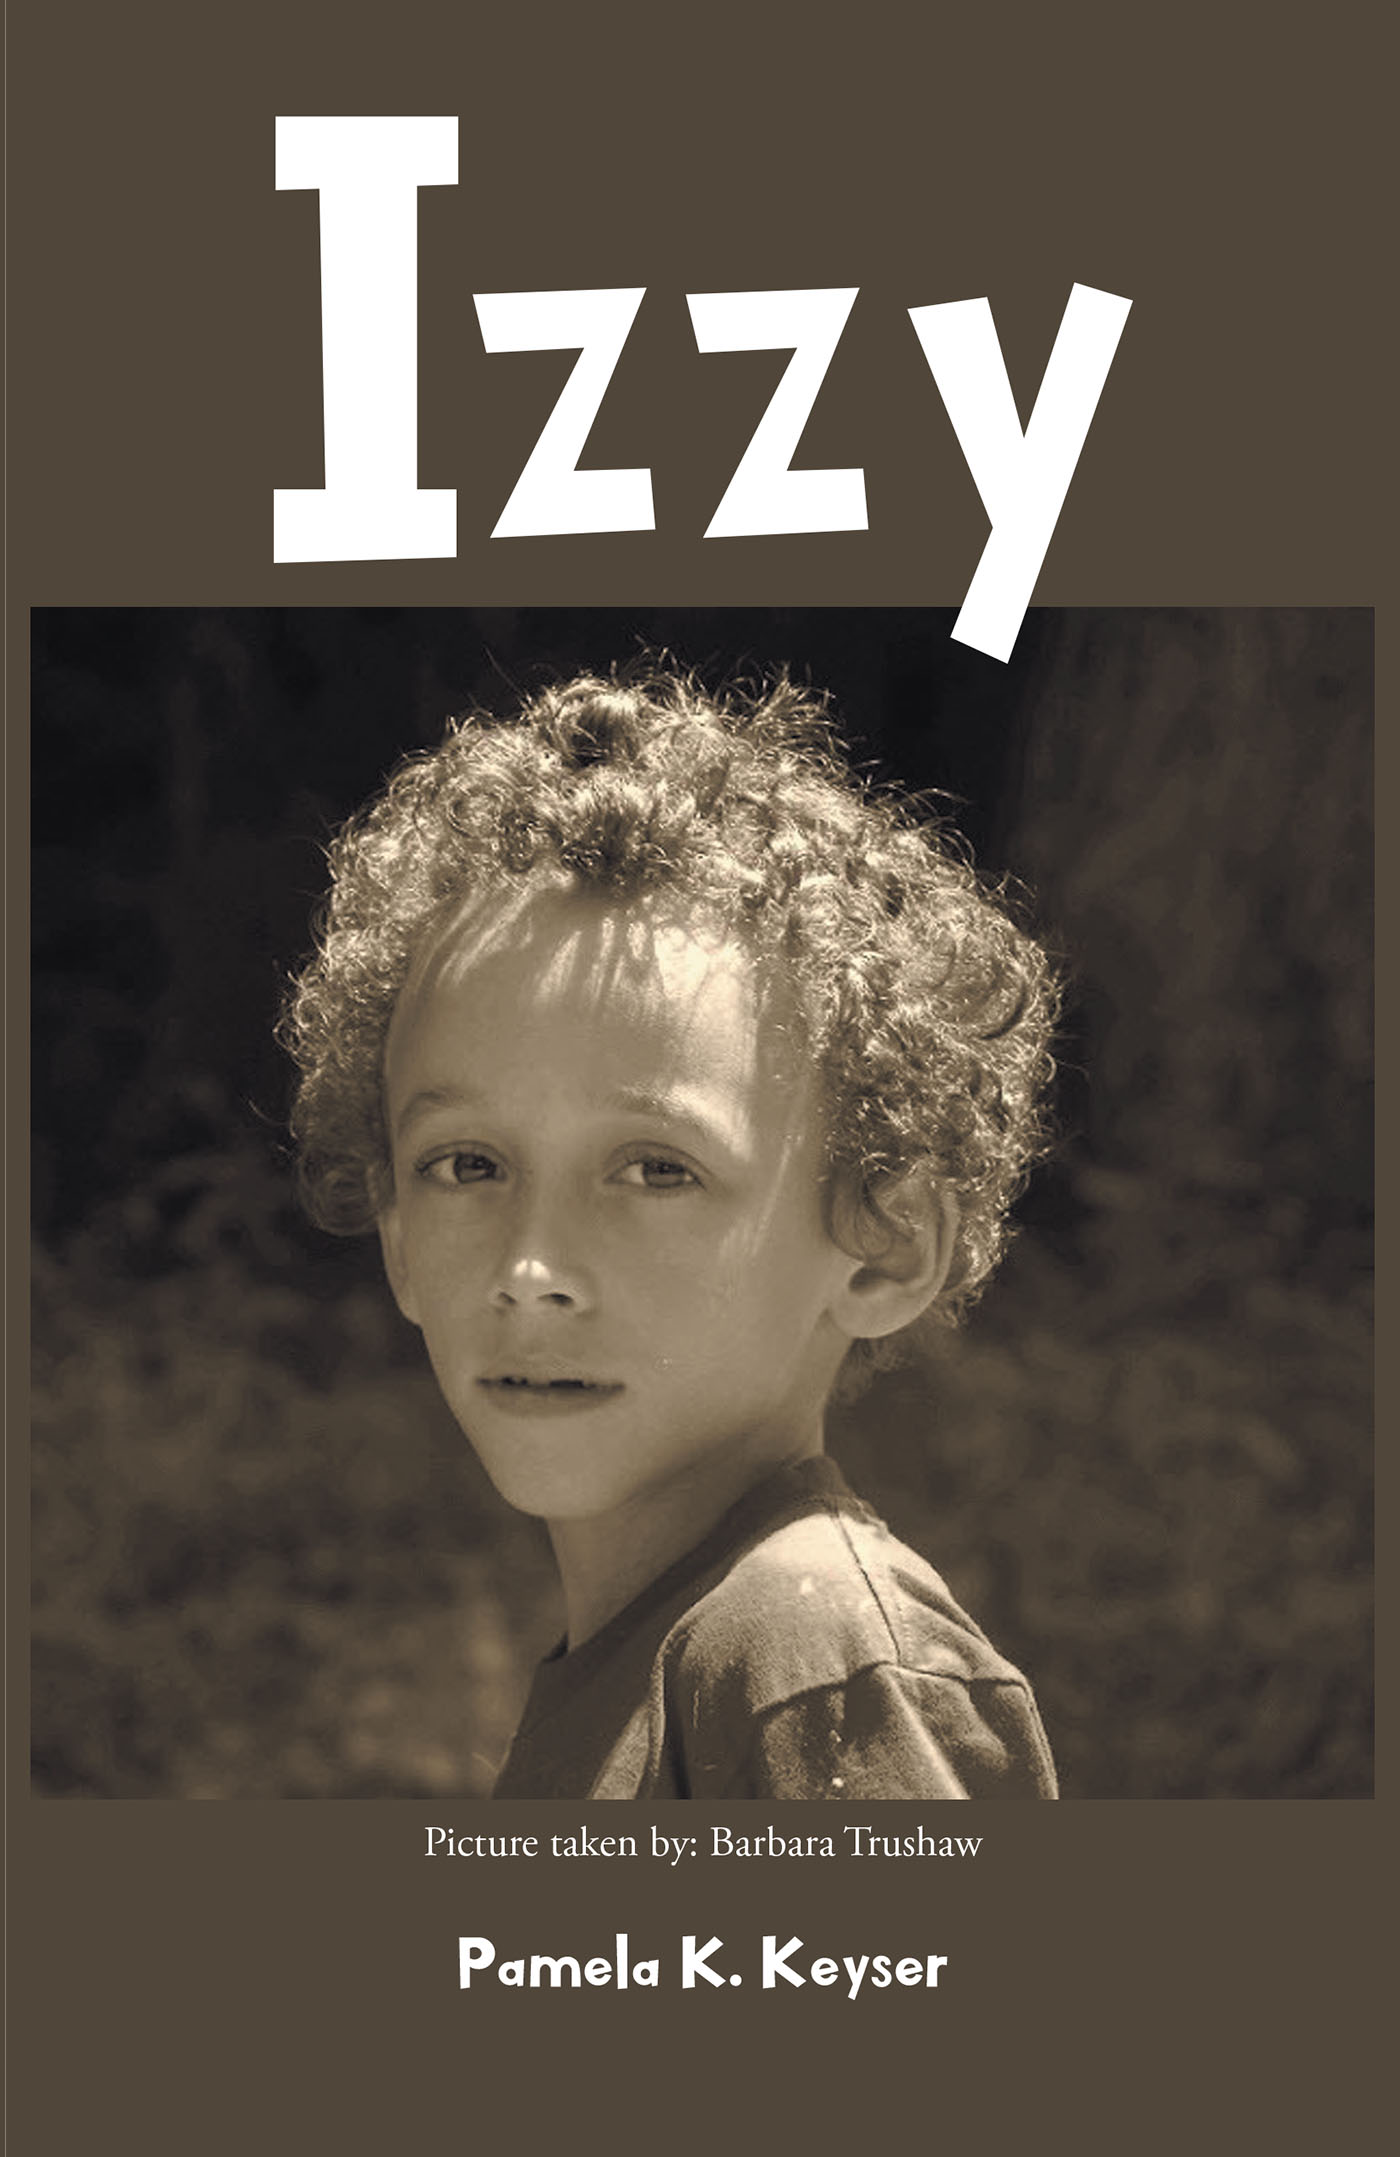 Pamela K. Keyser’s Newly Released "Izzy" is a Fascinating Tale of Experimental Cloning That Will Surprise and Delight the Imagination